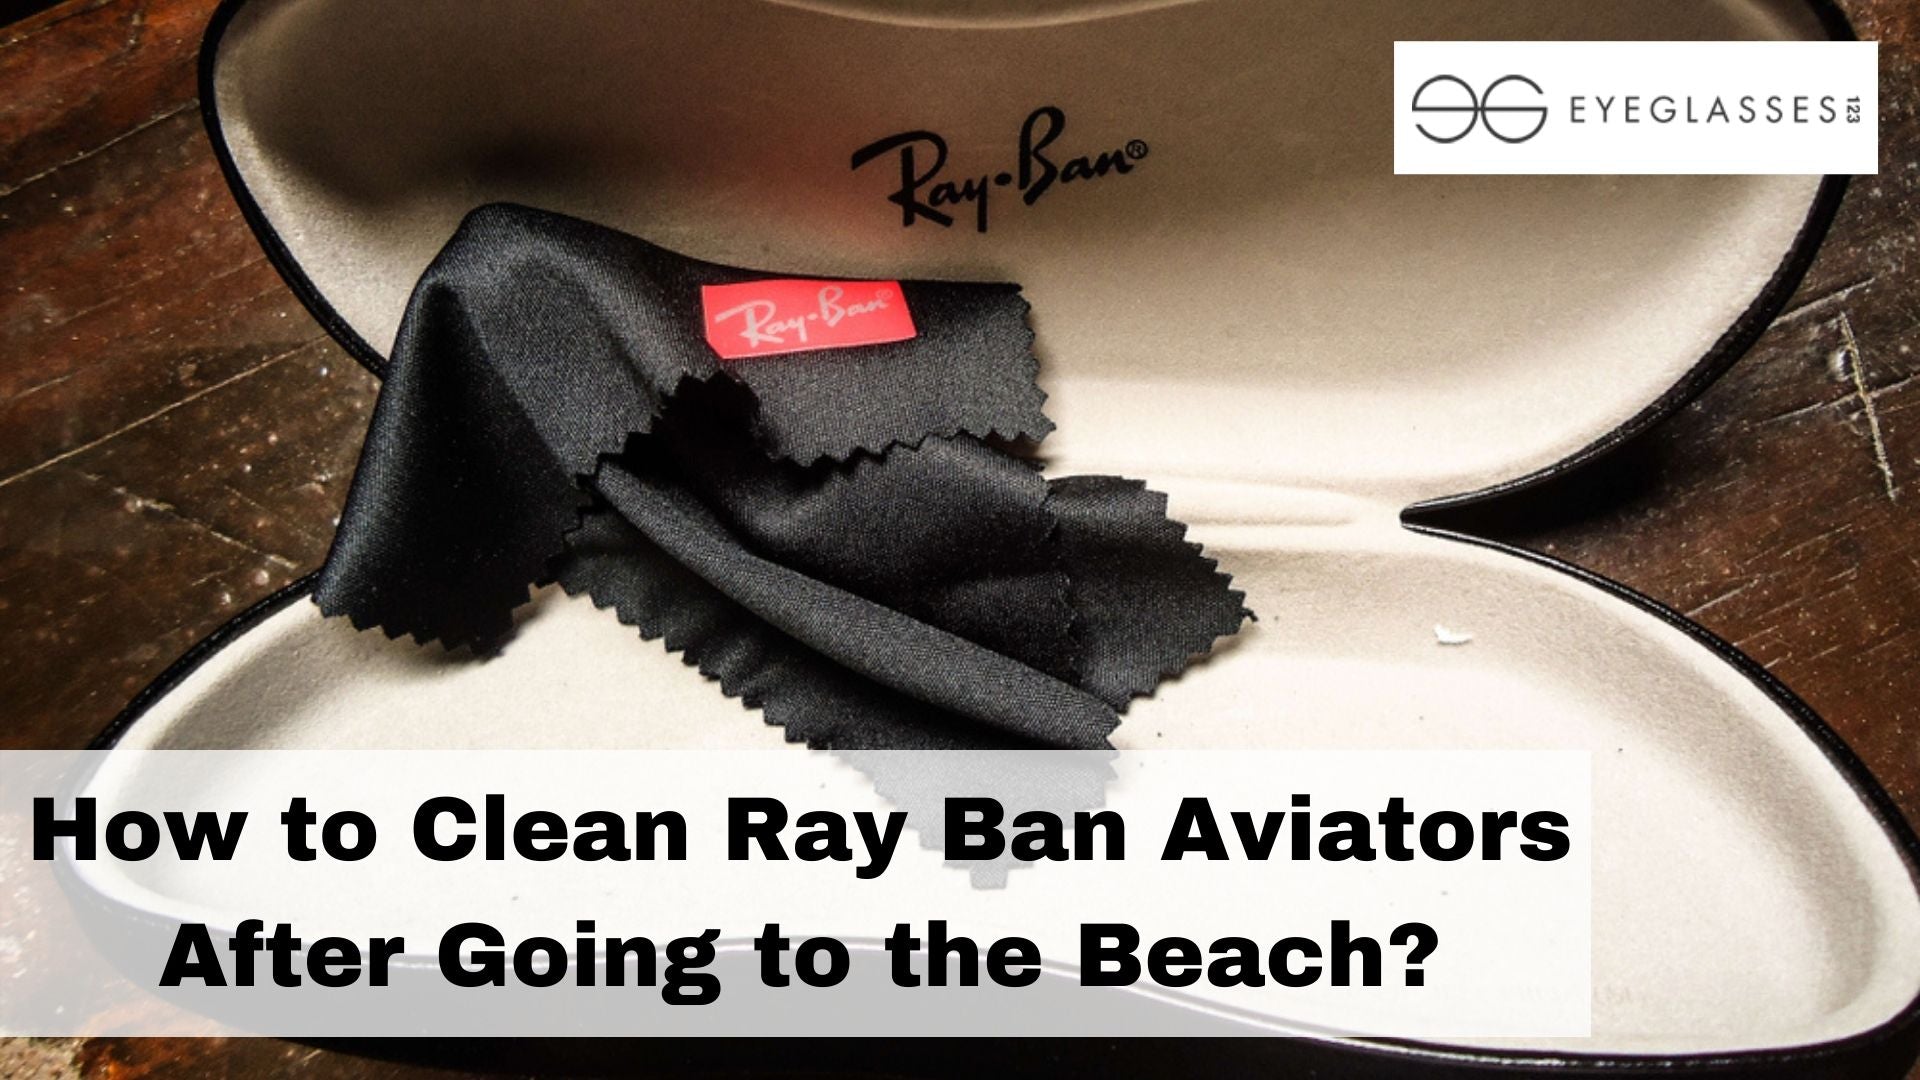 How to clean ray ban aviators after going to the beach?